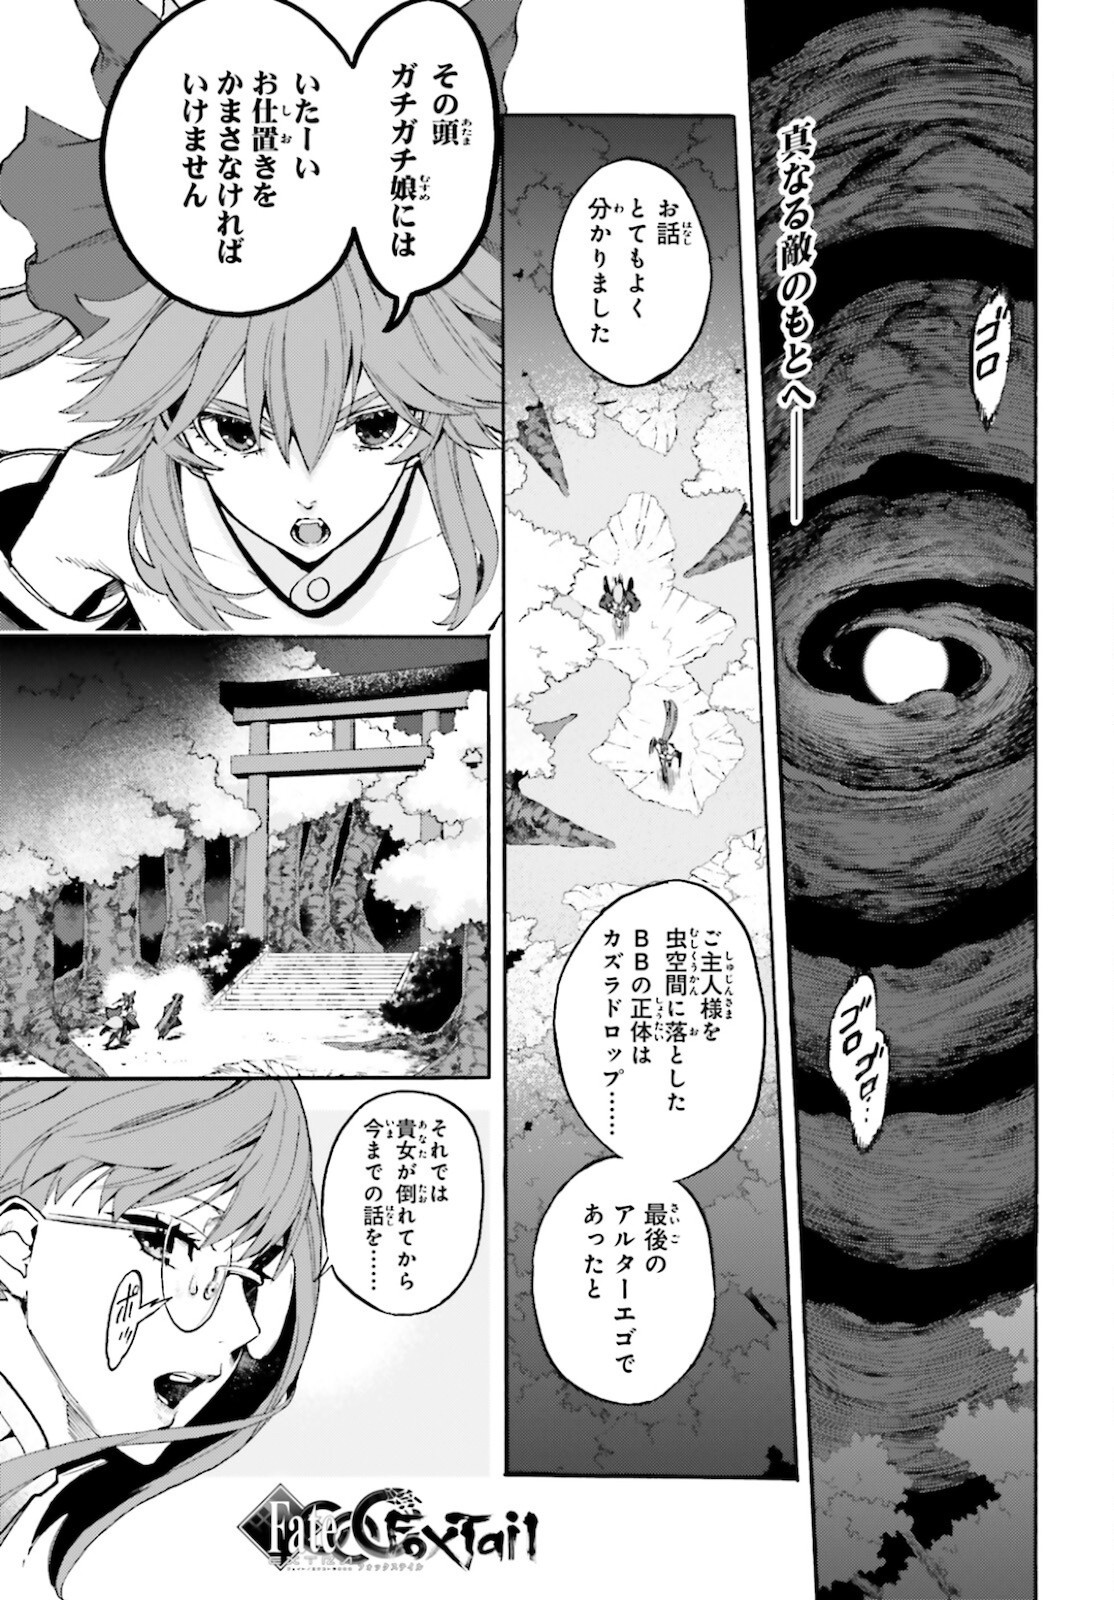 Fate Extra Ccc Fox Tail Chapter 66 Page 1 Raw Manga 生漫画